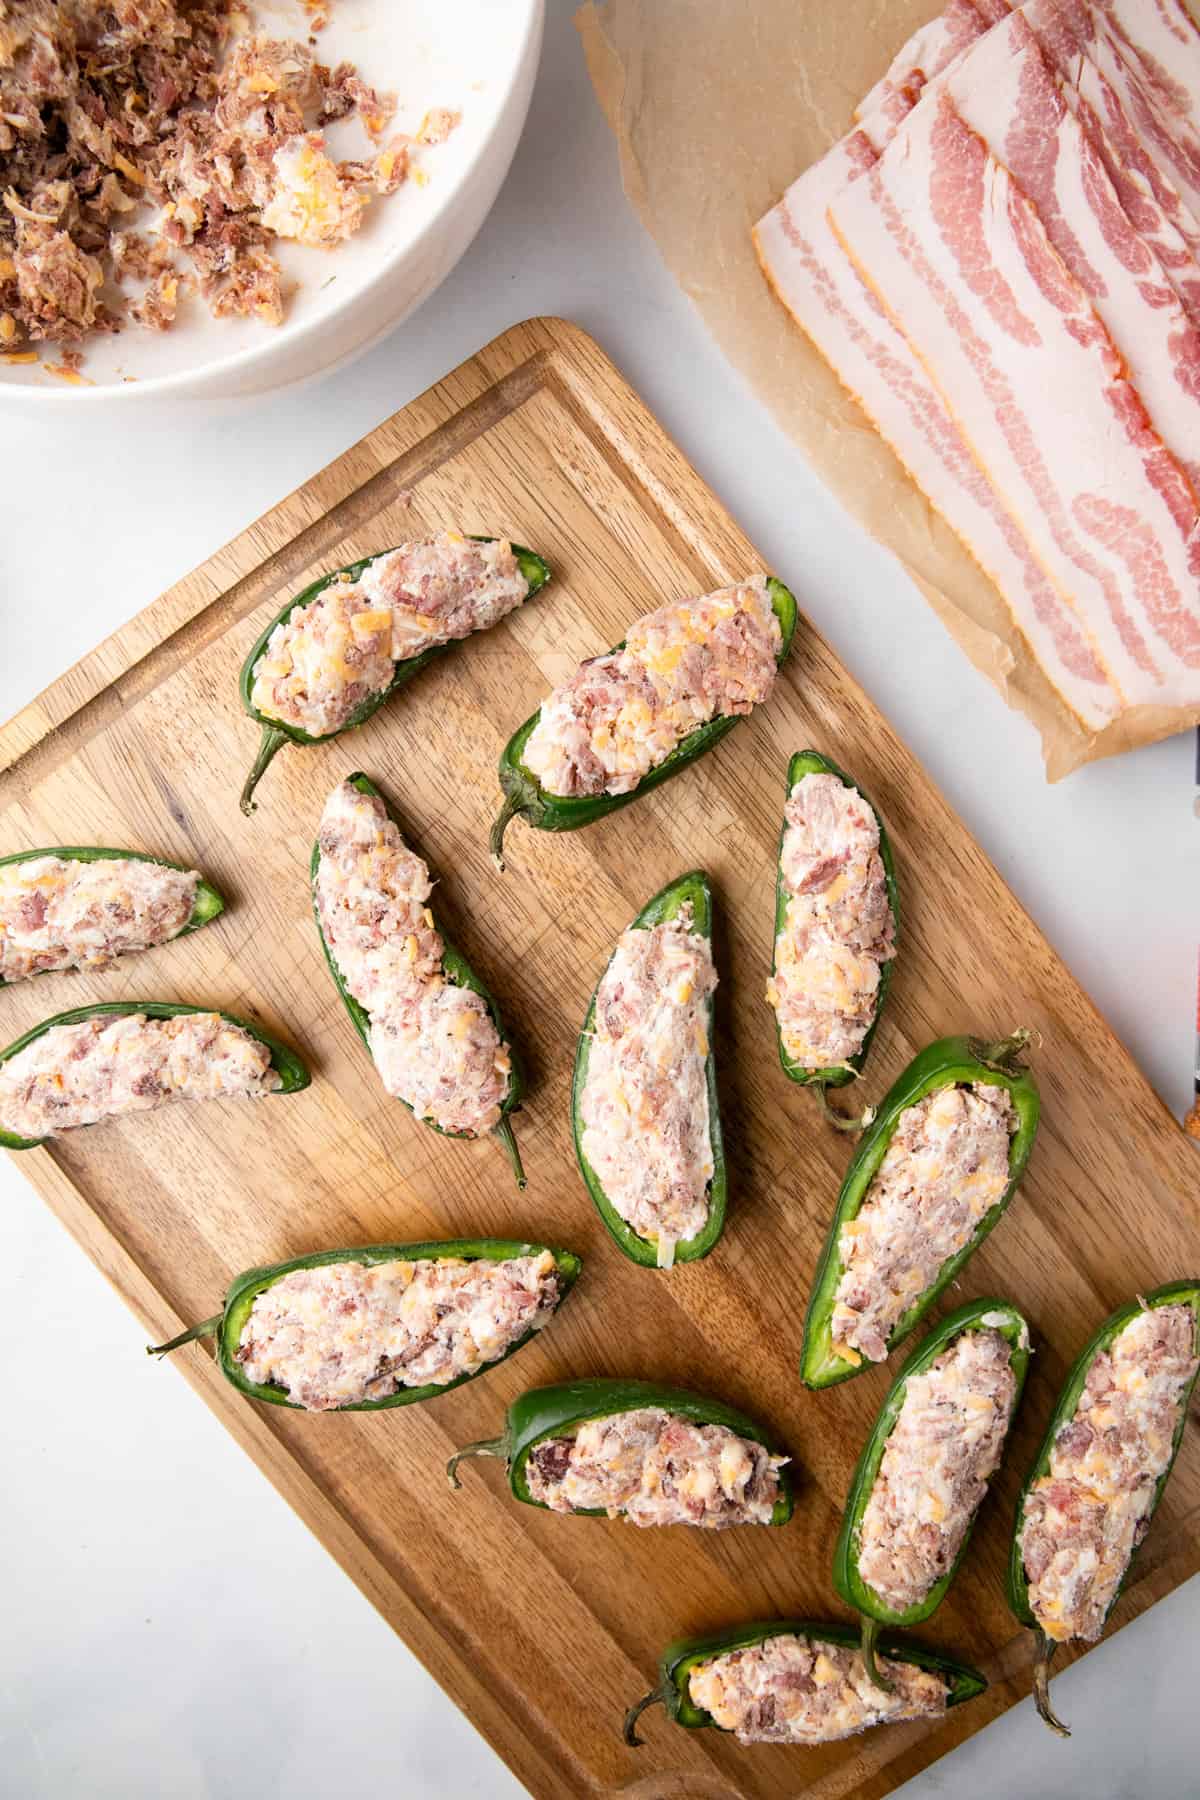 Sliced jalepenos filled with mixed stuffing arranged on cutting board